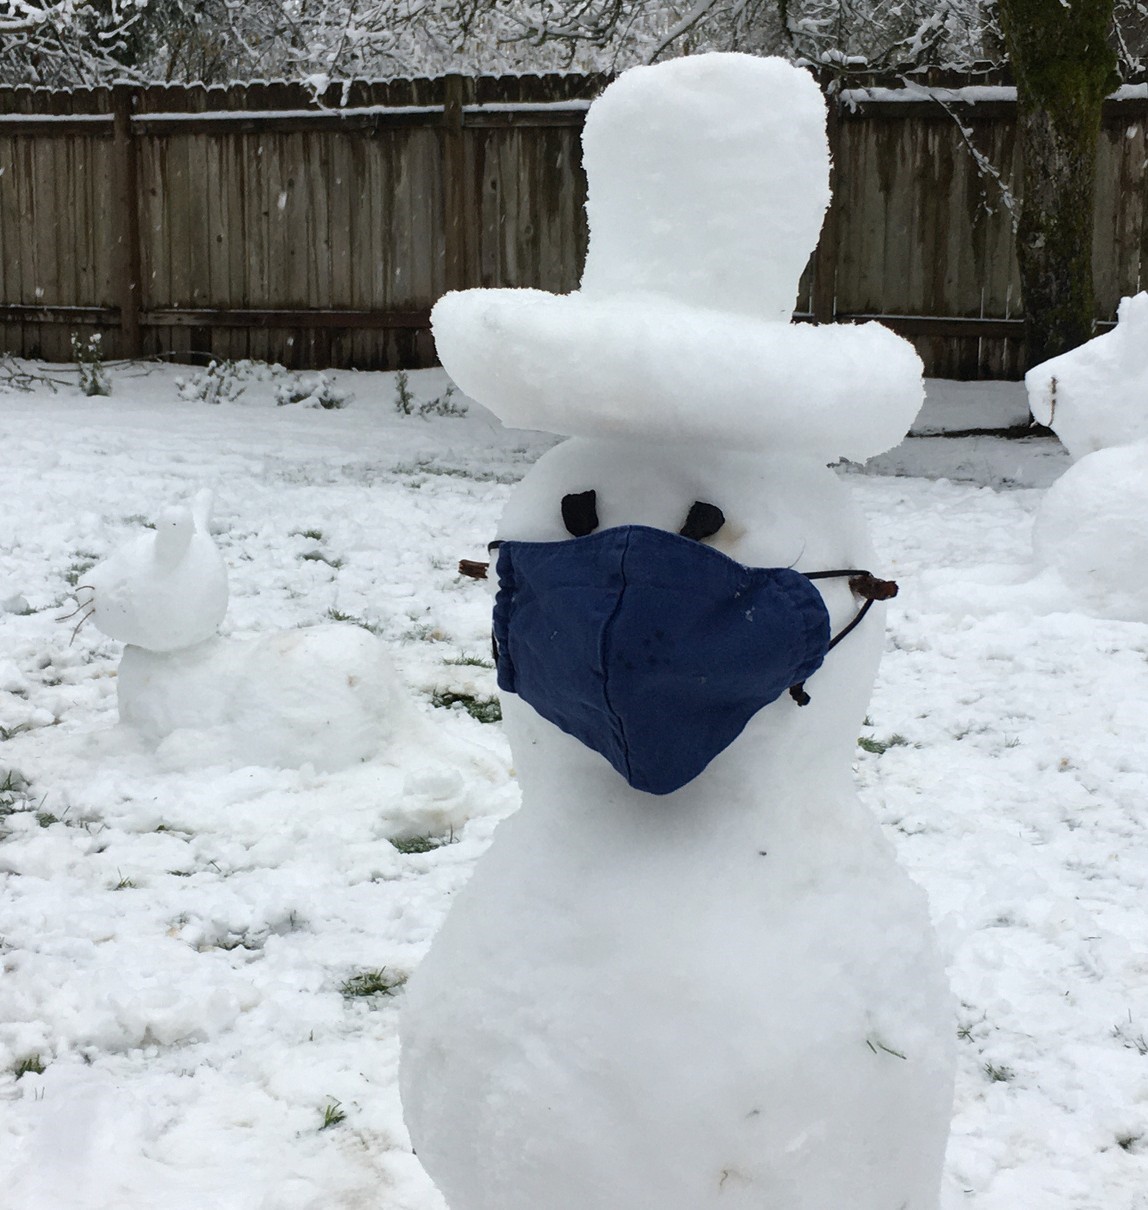 A snowman wearing a blue non surgical mask in the snow